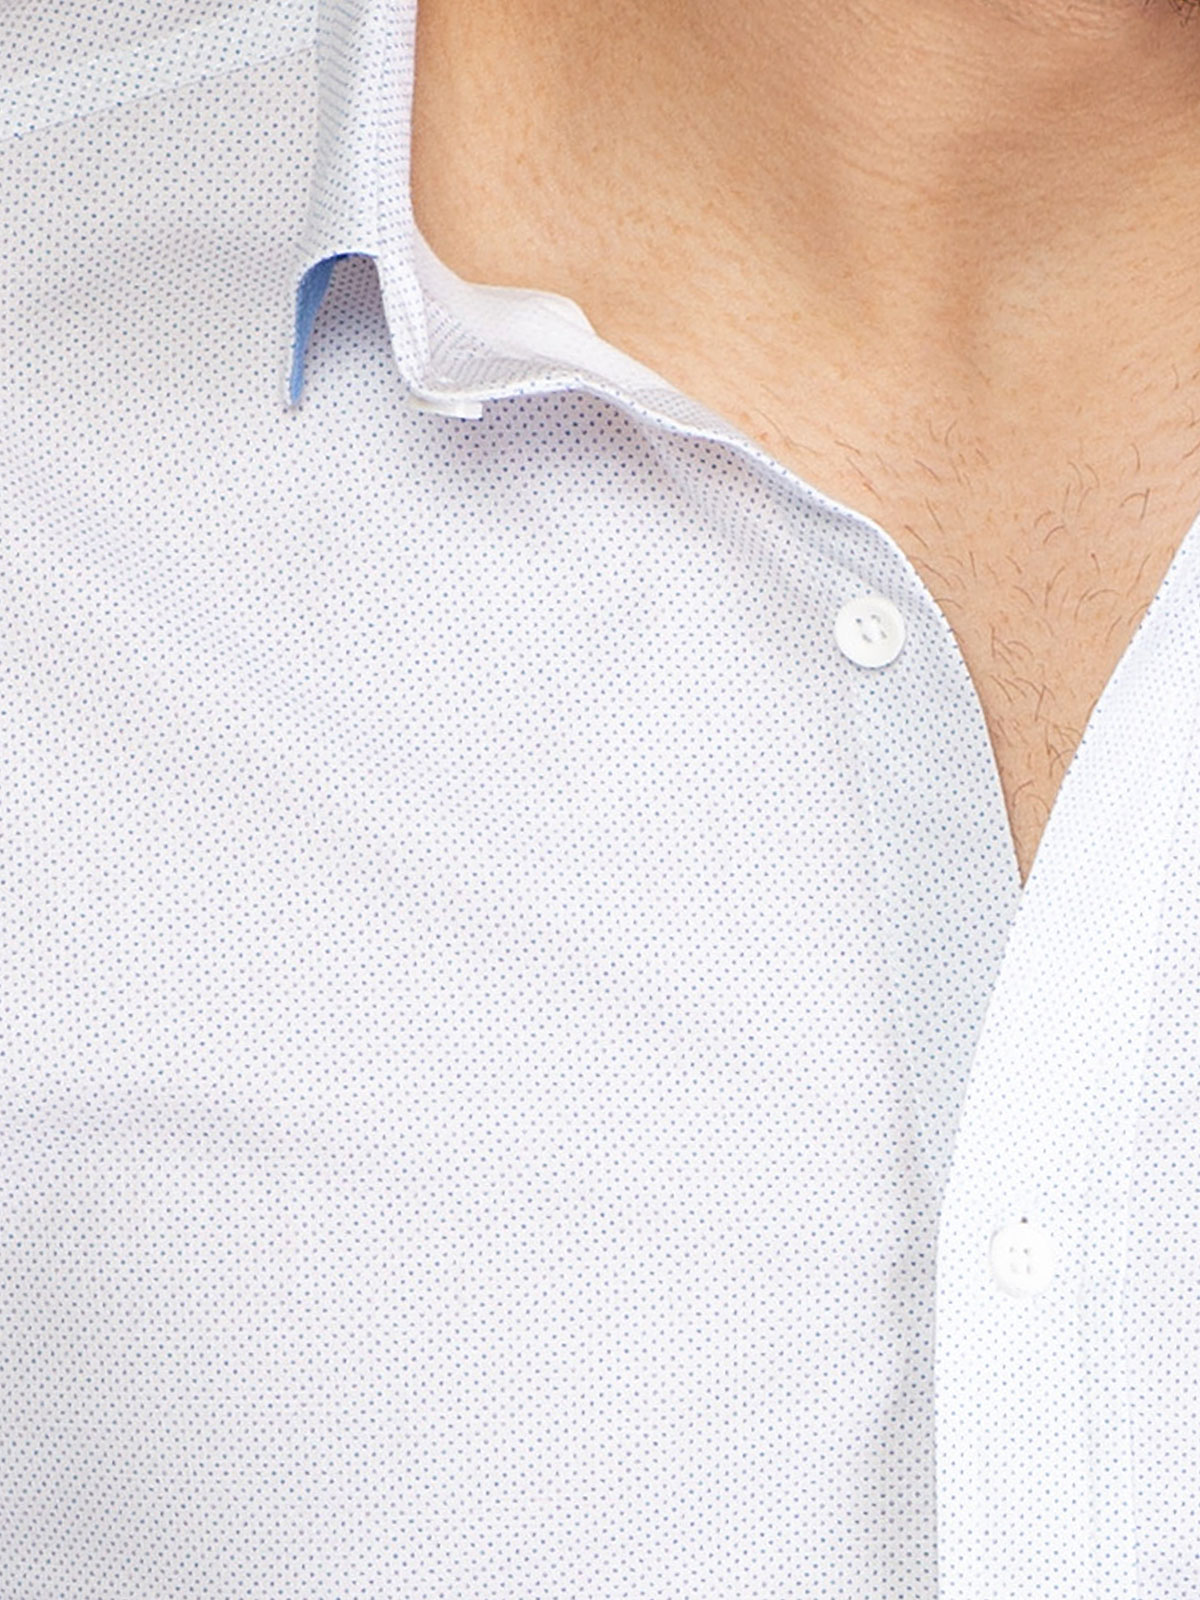 White shirt with small light blue dots - 21502 € 40.49 img3